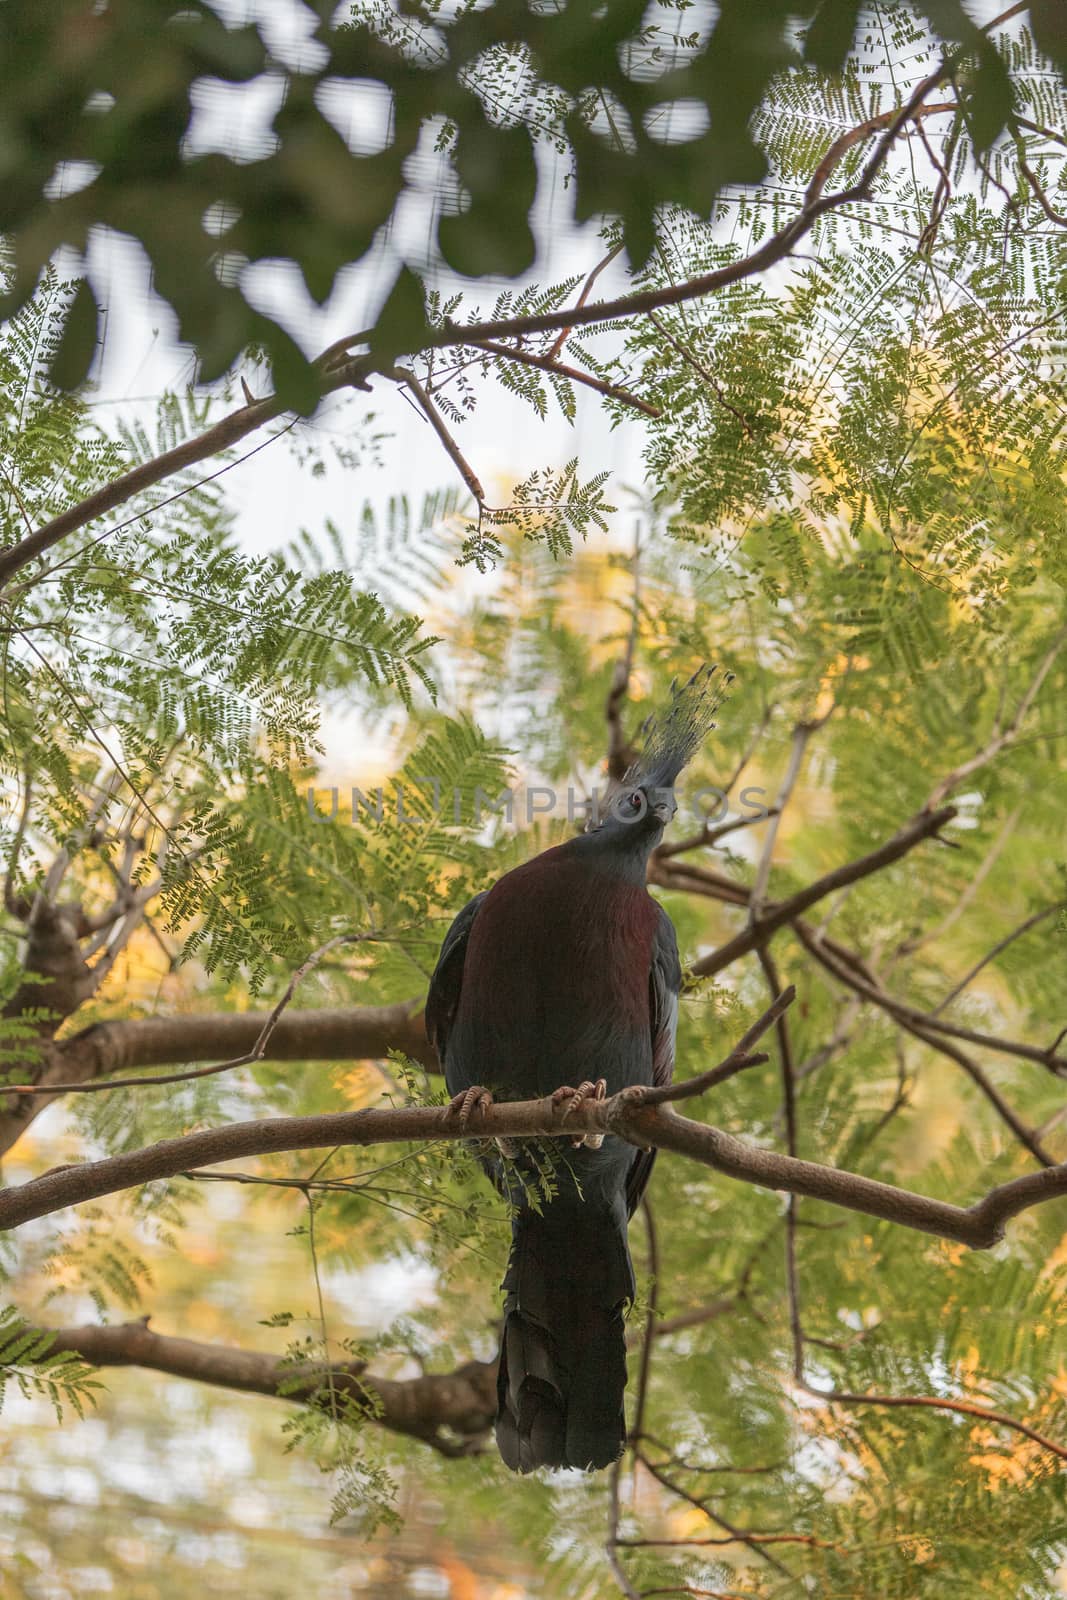 Victoria crowned pigeon, Goura victoria, is found in Northern New Guinea